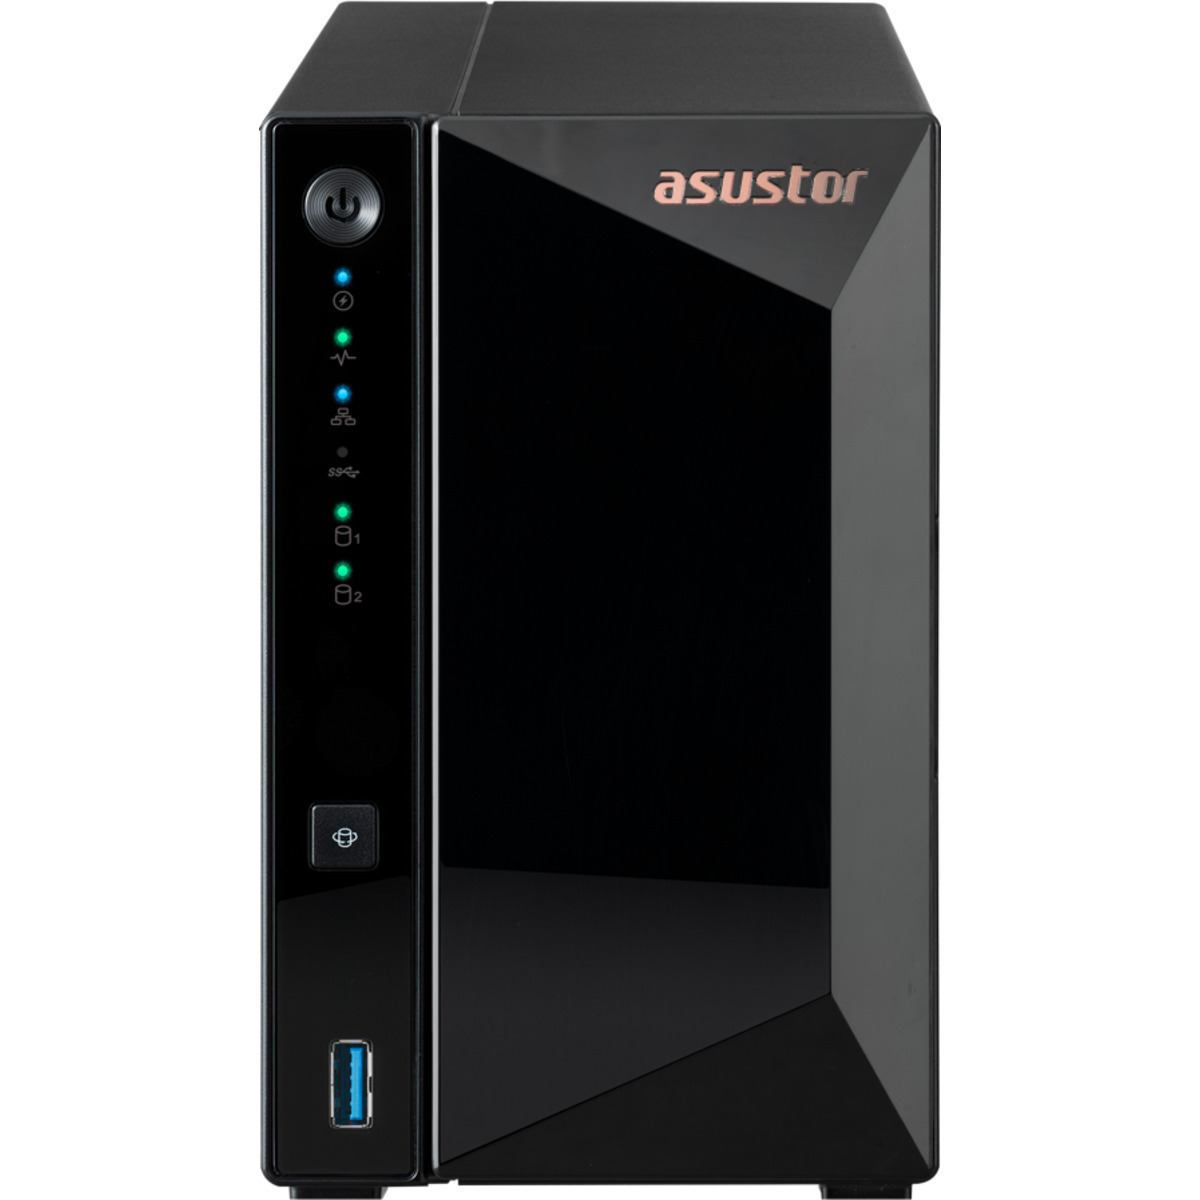 ASUSTOR DRIVESTOR 2 Pro Gen2 AS3302T v2 20tb 2-Bay Desktop Personal / Basic Home / Small Office NAS - Network Attached Storage Device 2x10tb Seagate IronWolf Pro ST10000NT001 3.5 7200rpm SATA 6Gb/s HDD NAS Class Drives Installed - Burn-In Tested - ON SALE DRIVESTOR 2 Pro Gen2 AS3302T v2